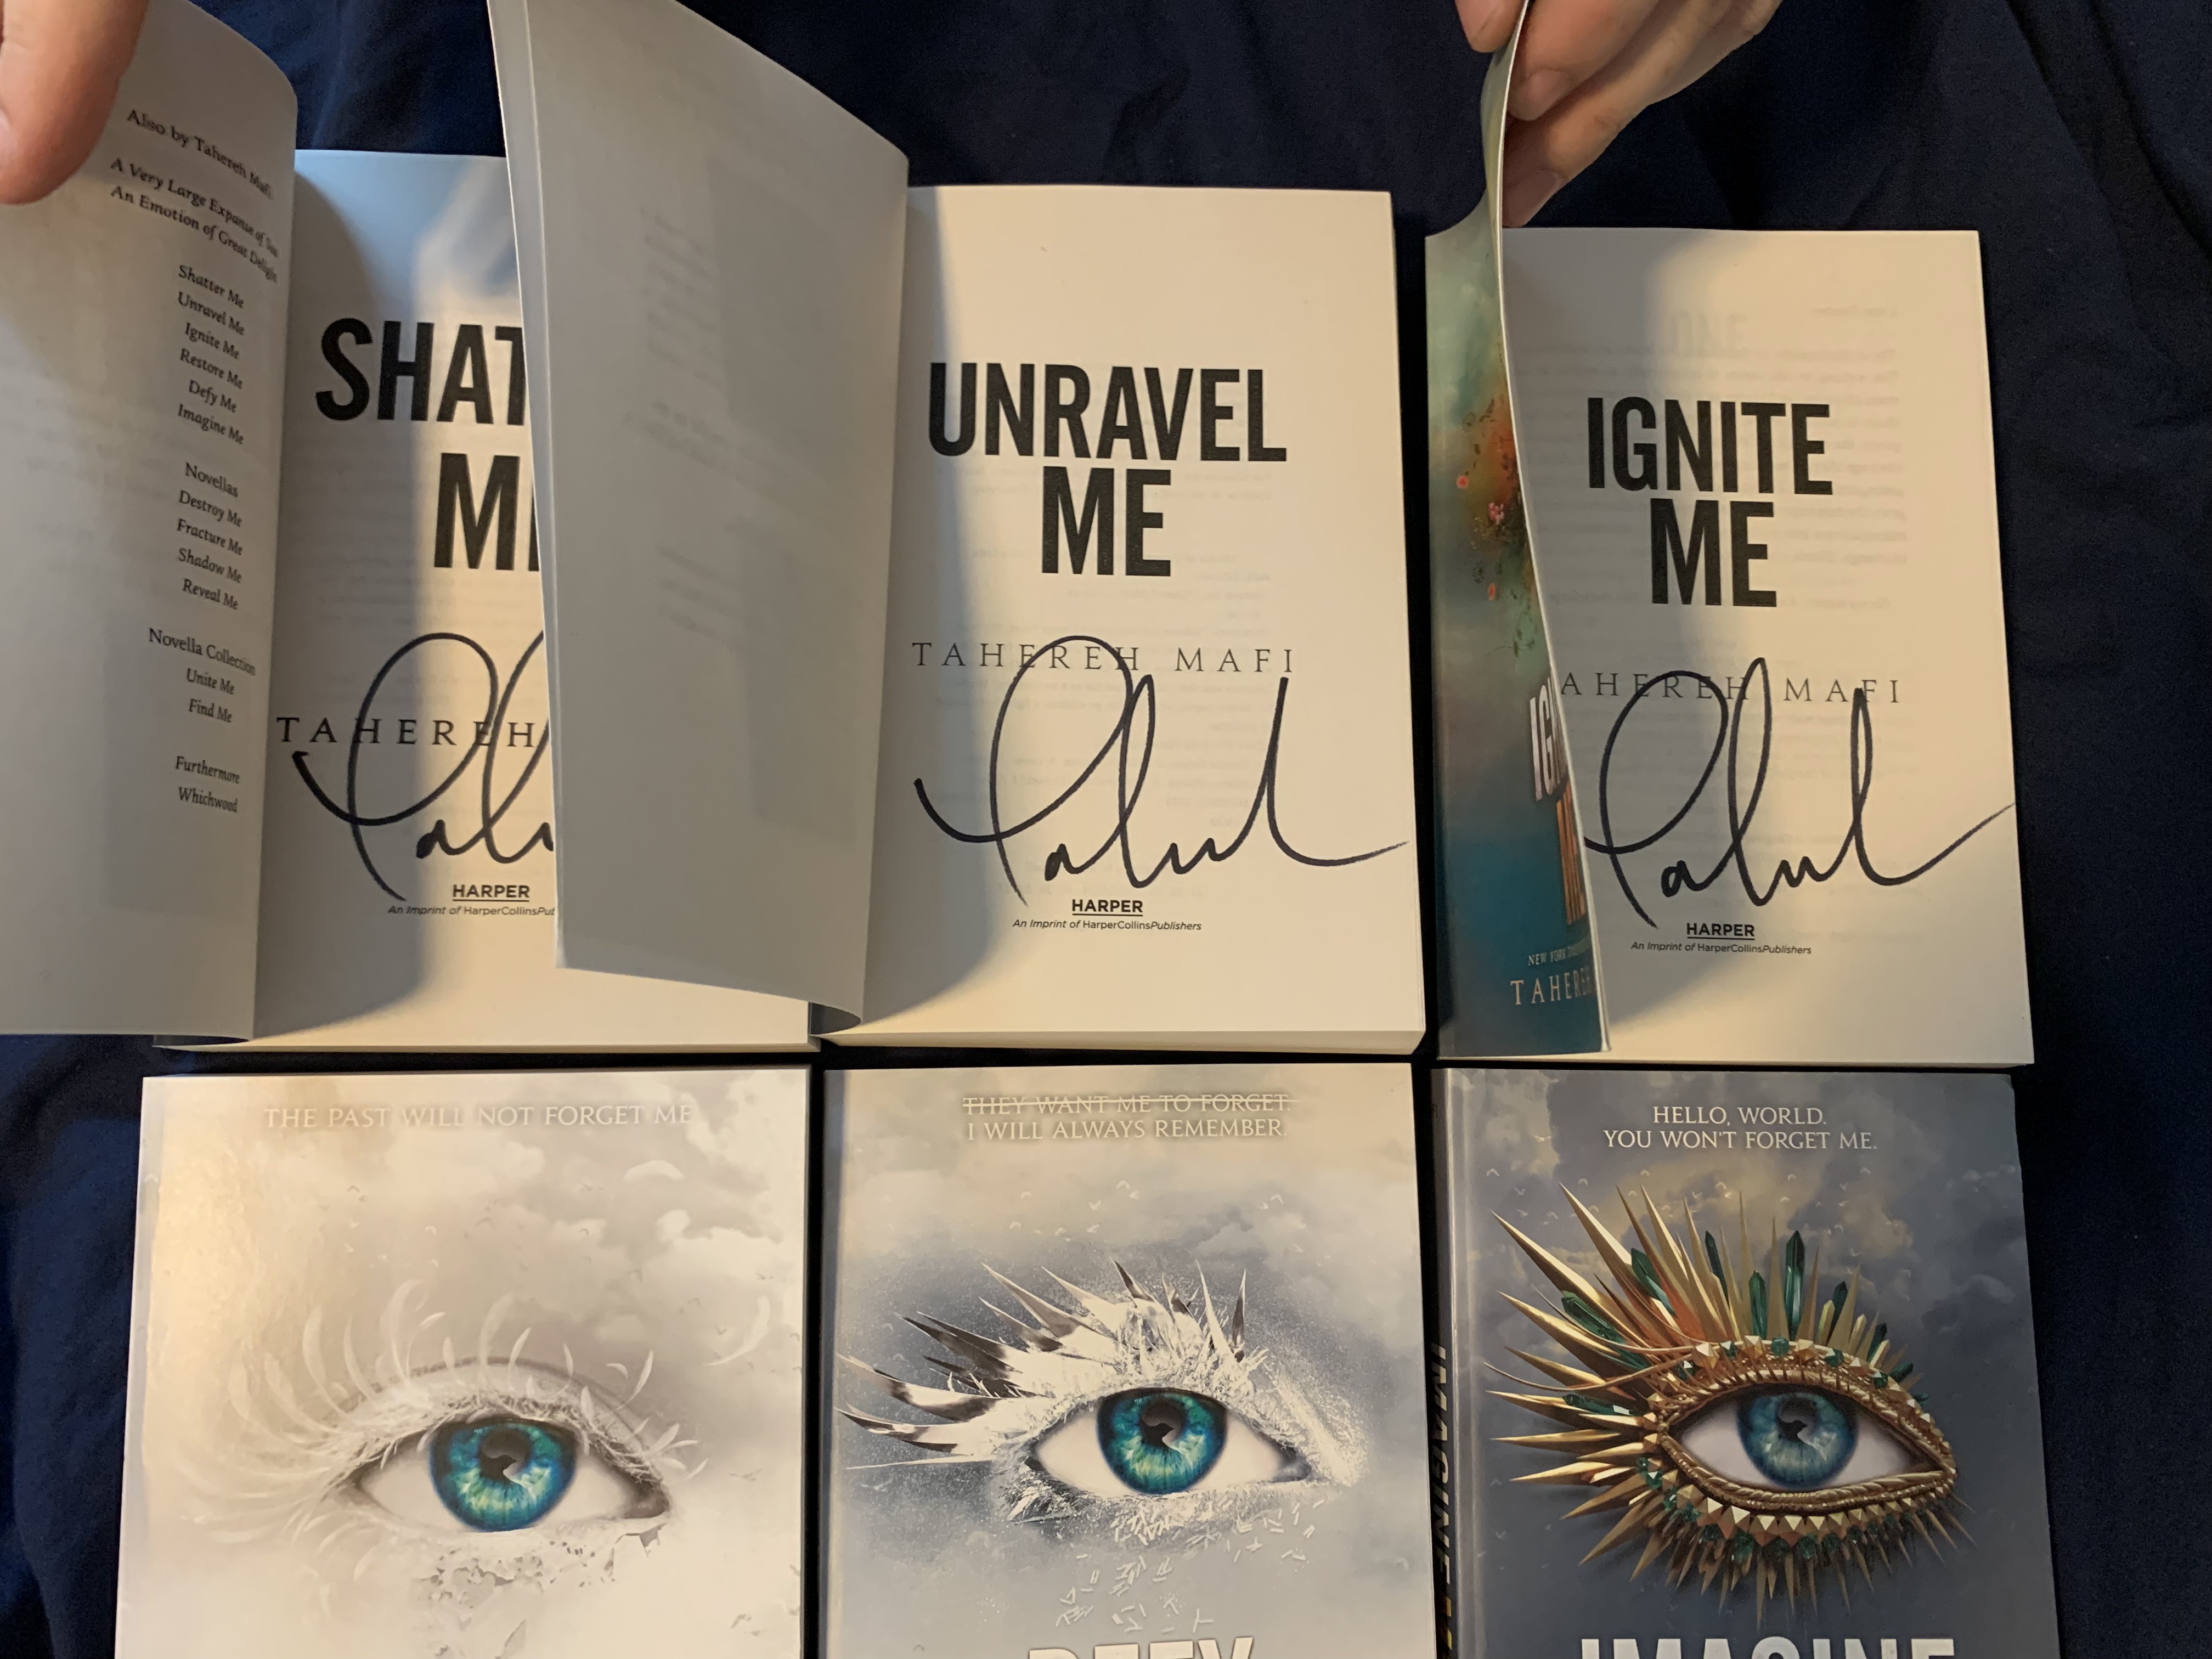 Shatter Me Series 6-Book Box Set Great Condition by Tahereh Mafi paperback